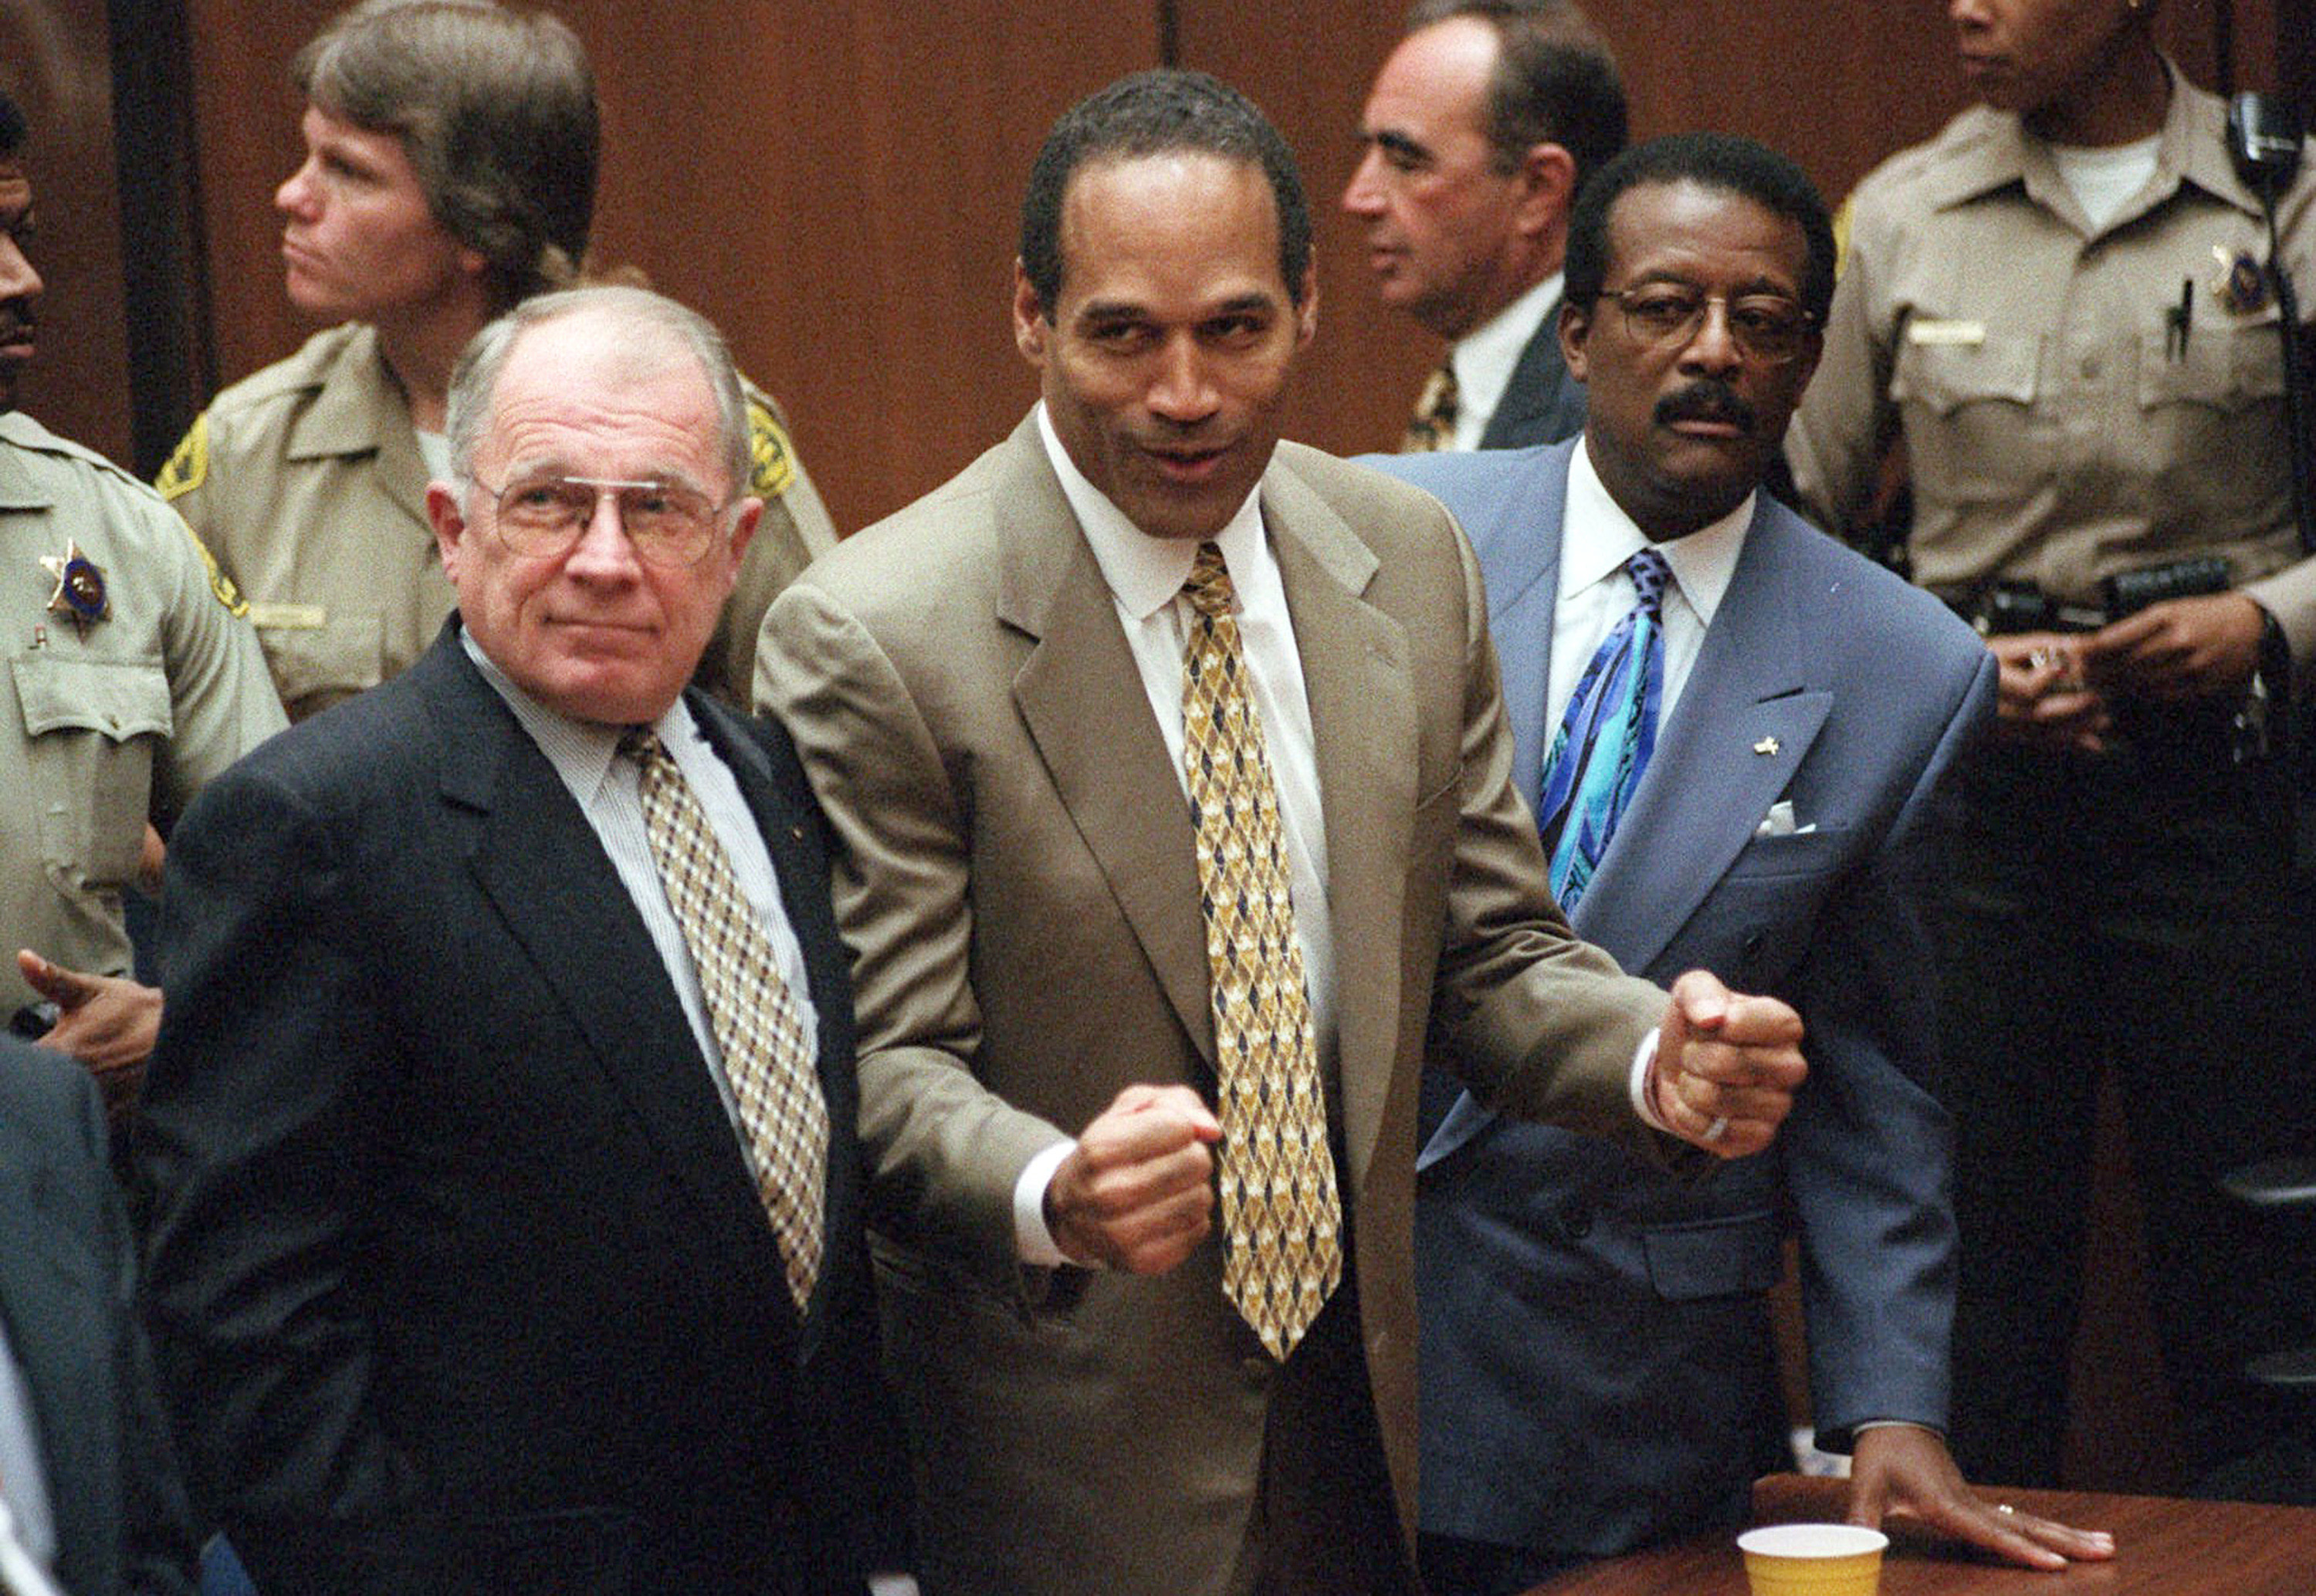 O.J. Simpson reacts as he is found not guilty of murdering his ex-wife Nicole Brown Simpson and her friend Ron Goldman, at the Criminal Courts Building in Los Angeles. At left is defense lawyer F. Lee Bailey and at right is defense attorney Johnnie Cochran Jr. Defense attorney Robert Shapiro is in profile behind them. (AP Photo/Daily News, Myung J. Chun, Pool, File) (Myung J. Chun&mdash;ASSOCIATED PRESS)